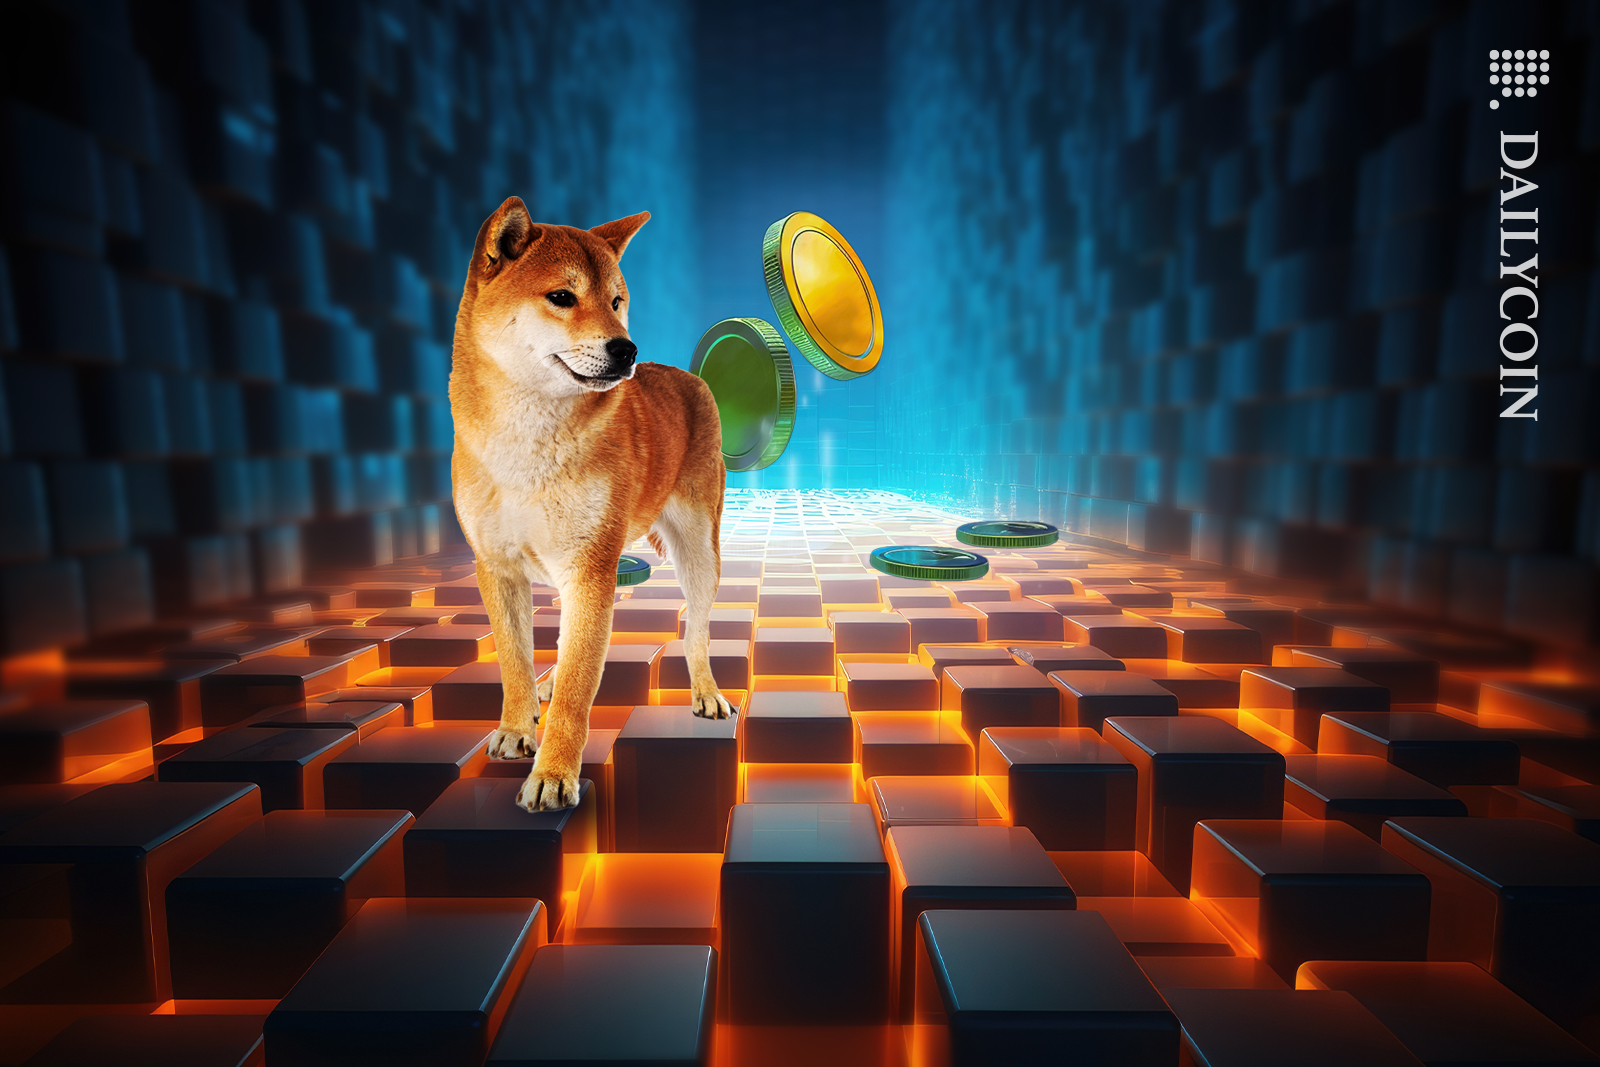 Shiba Inu walking on the little dark blocks. Behind the dog coins are floating up from the ground.